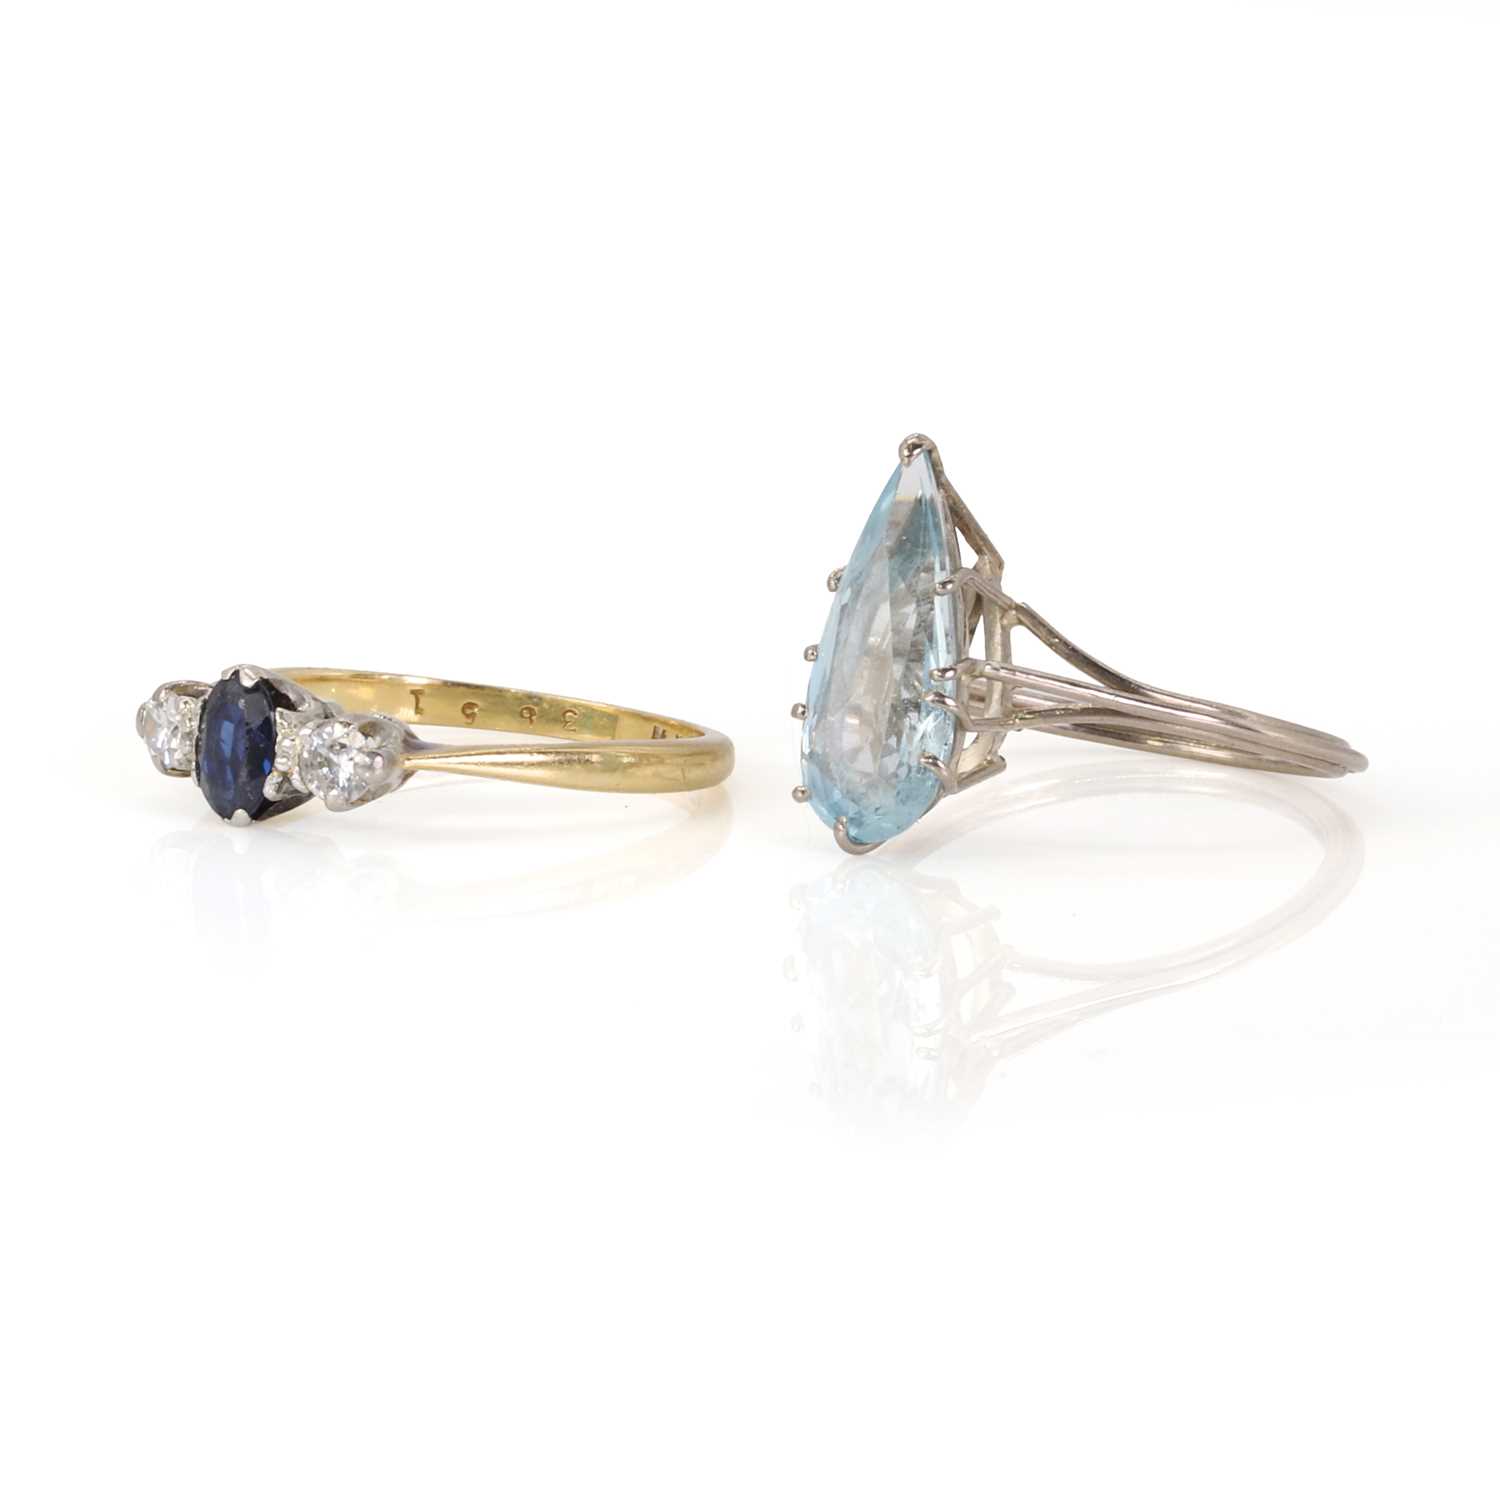 A white gold aquamarine ring and a gold sapphire and diamond ring, - Image 2 of 3